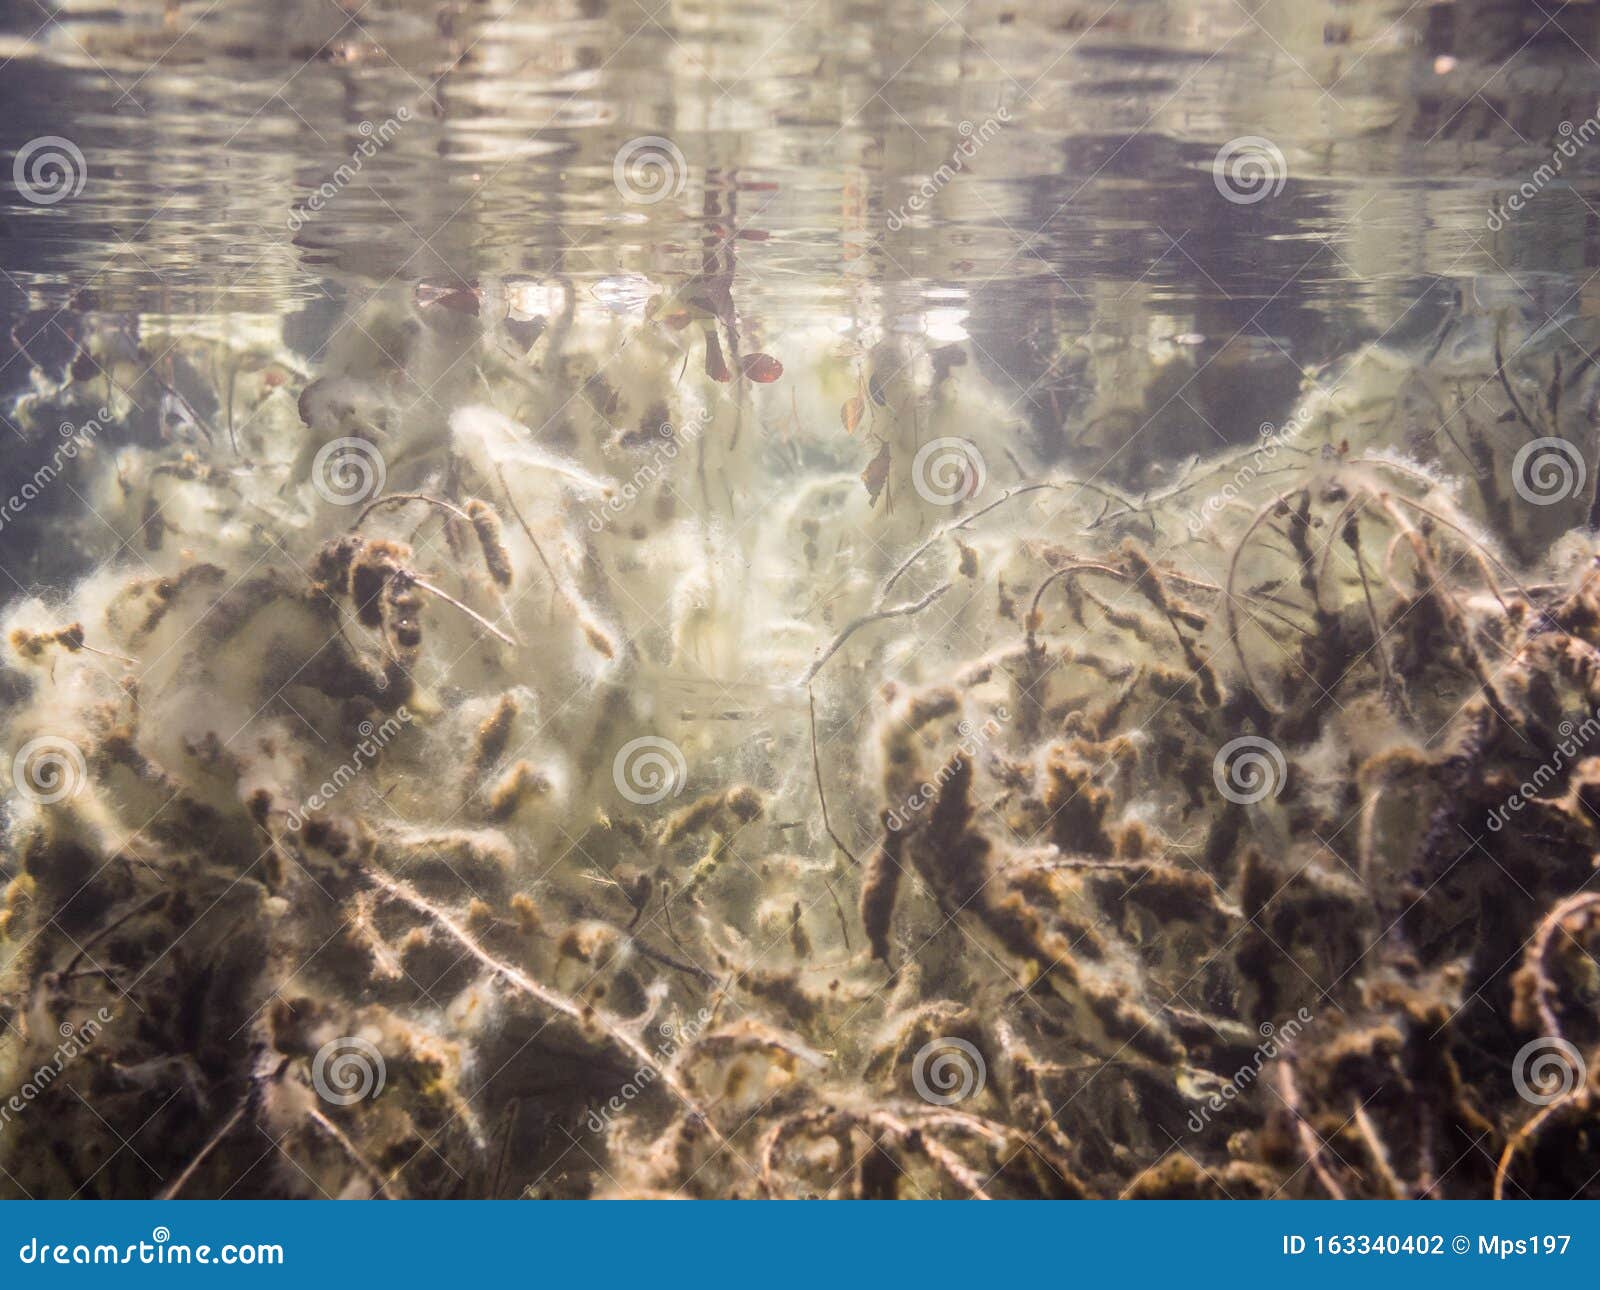 Algae Tangled Up on Underwater Branches Stock Photo - Image of surface